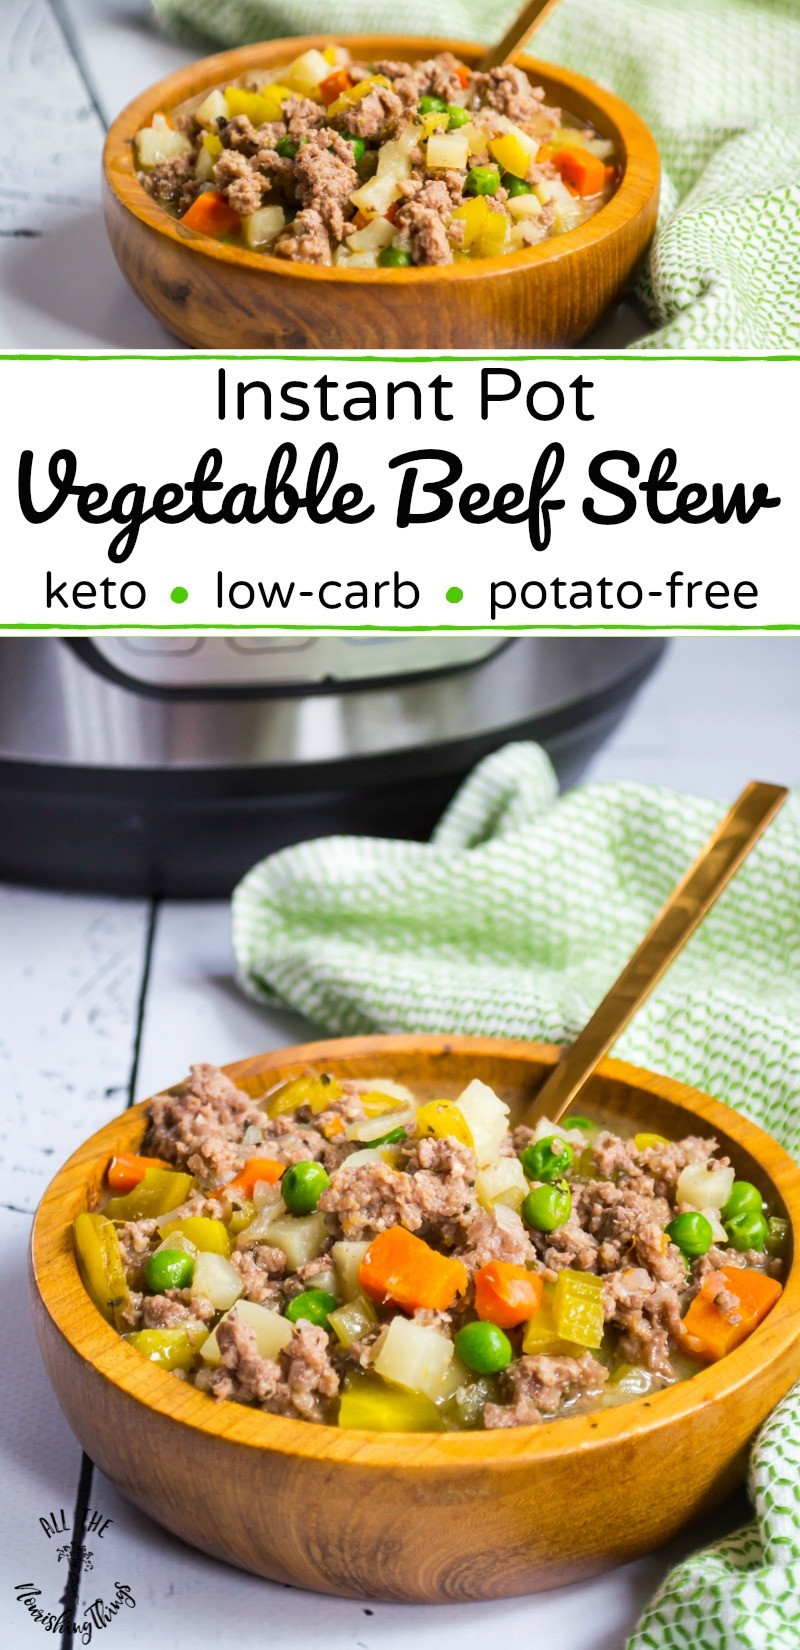 Instapot Keto Beef
 Instant Pot Ve able Beef Stew keto Whole30 potato free